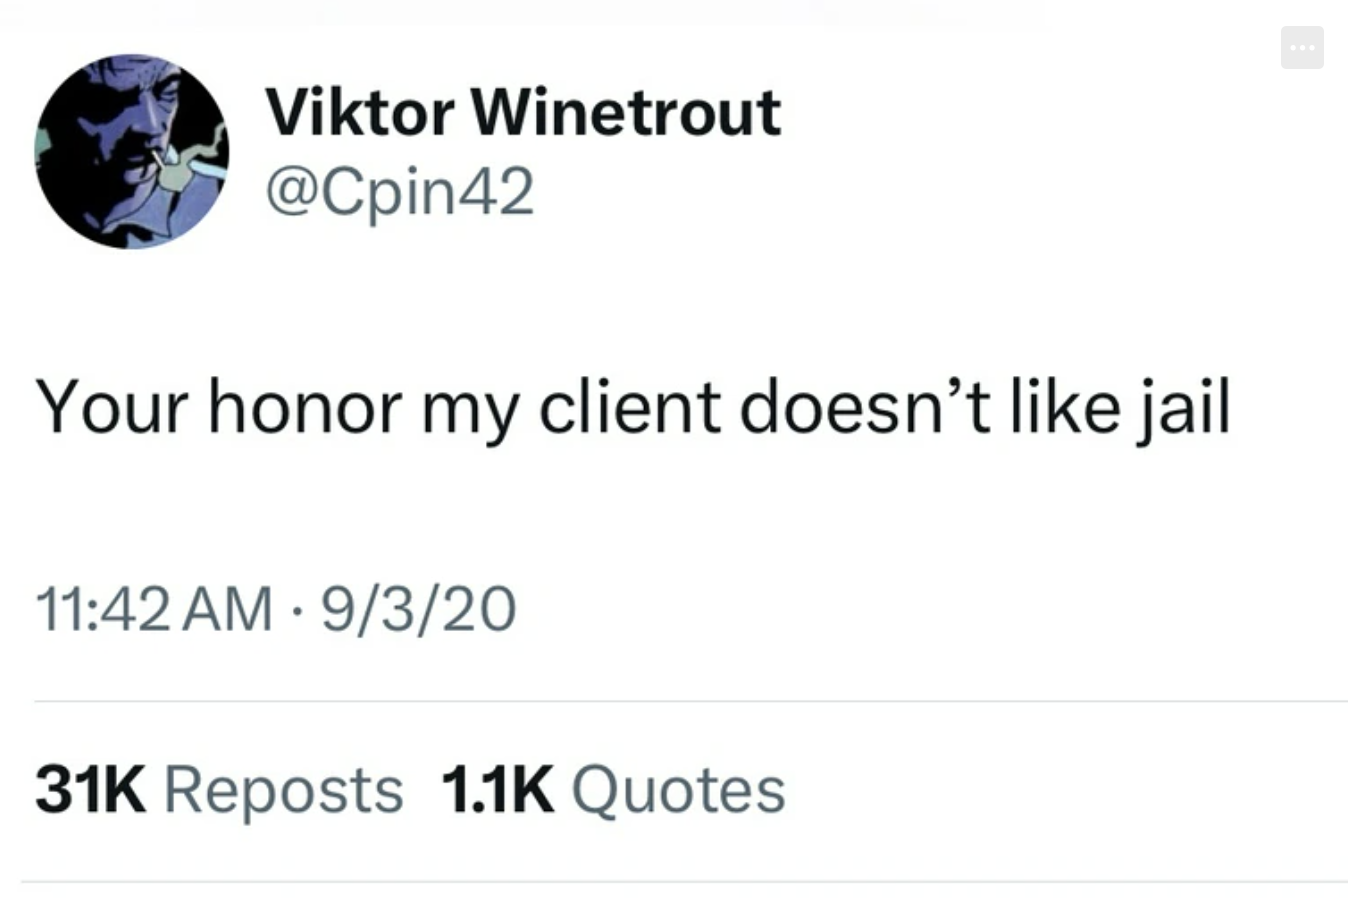 screenshot - Viktor Winetrout Your honor my client doesn't jail . 93 Reposts Quotes